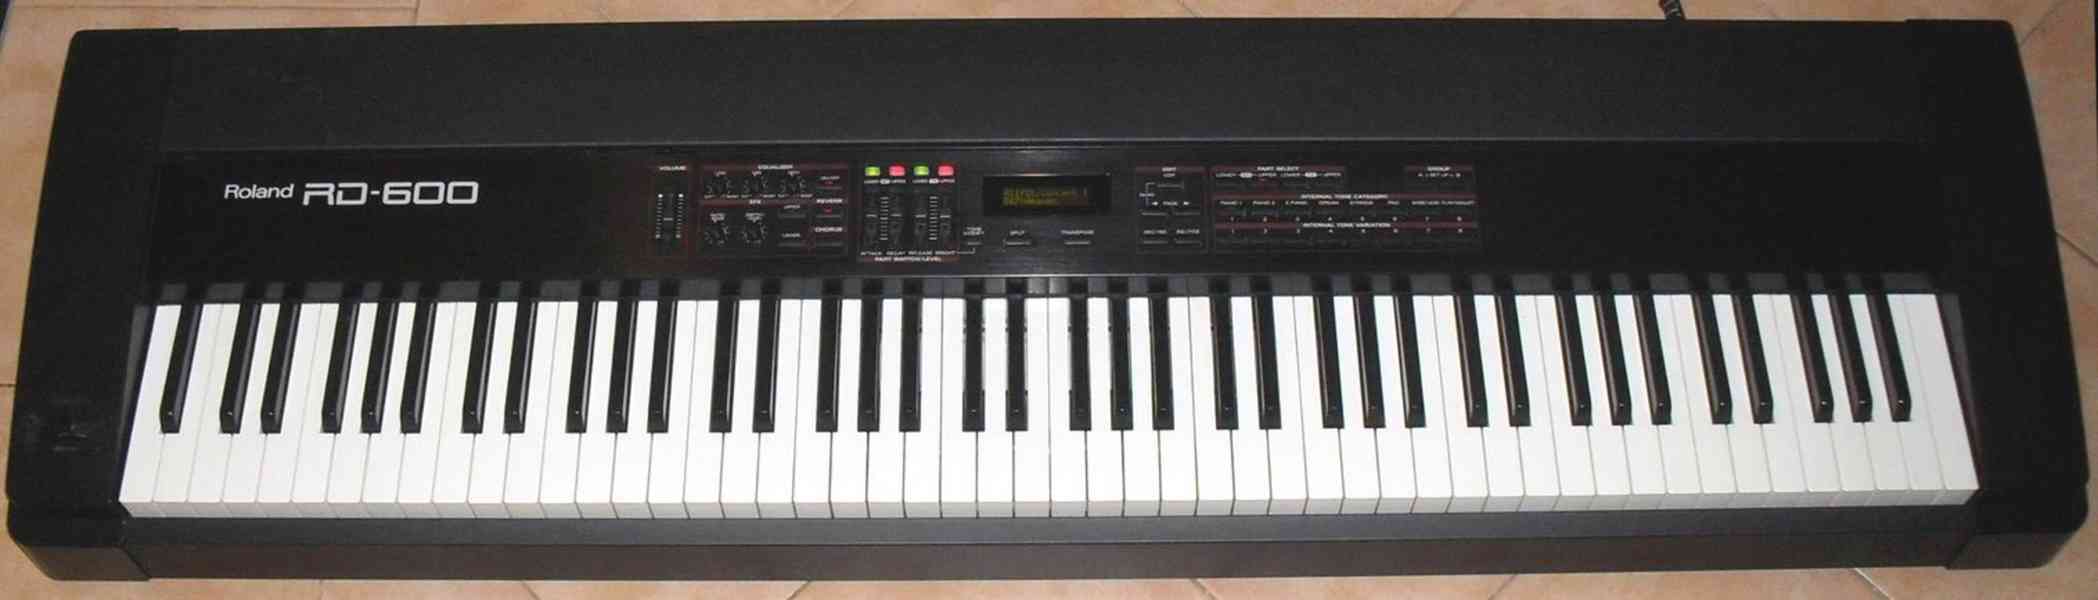 Stage piano Roland RD 600 - foto 1